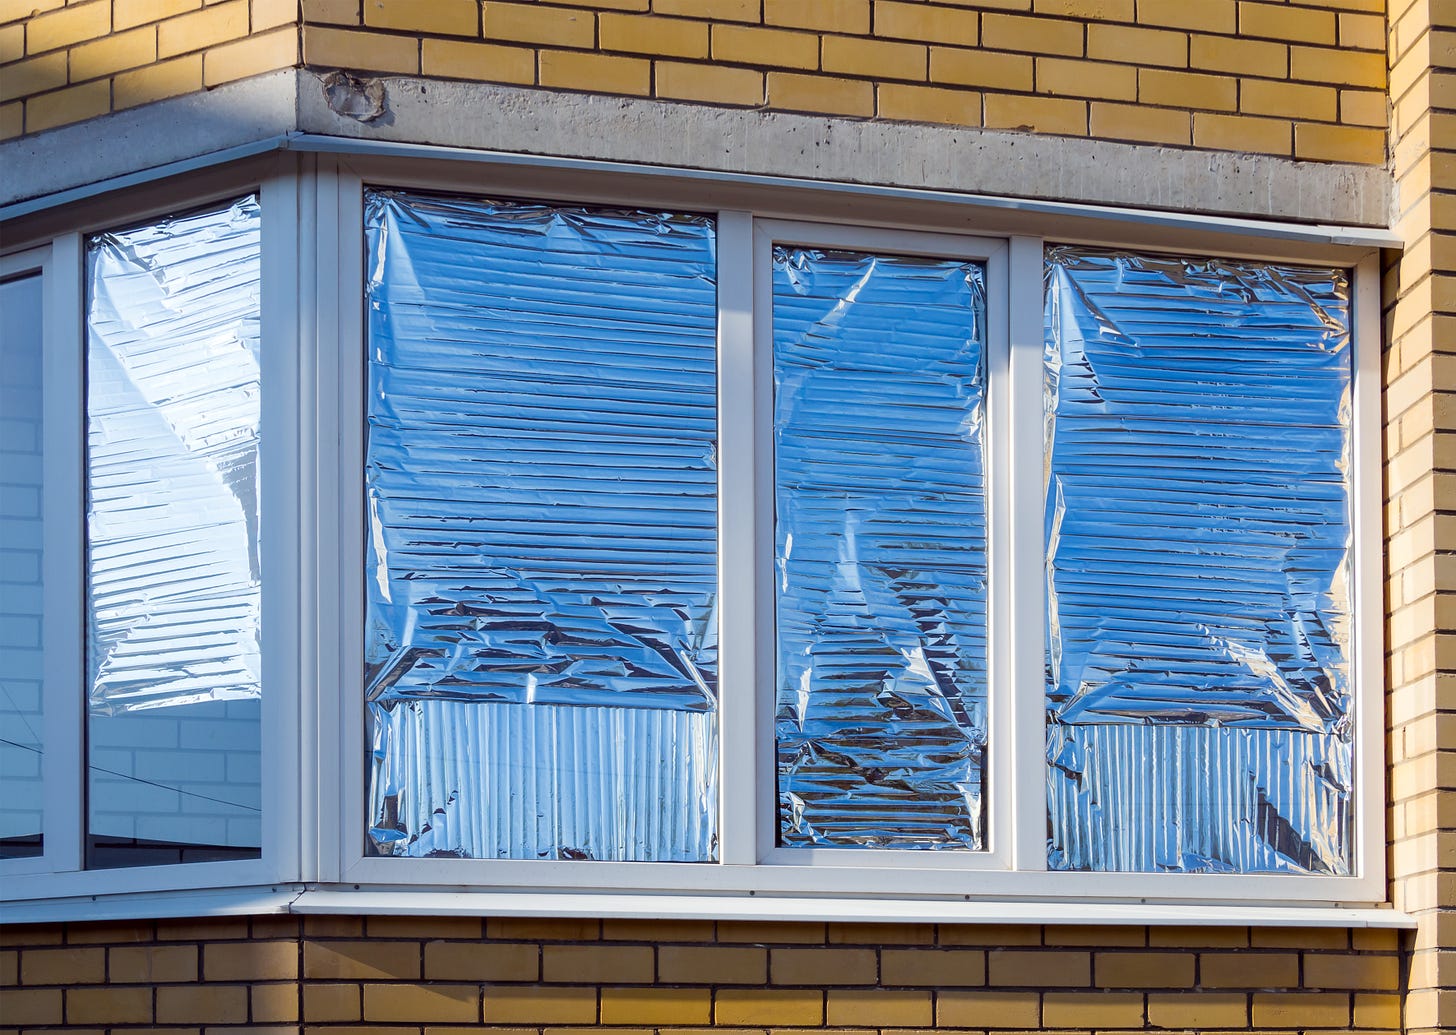 Why Do People Put Foil on Windows? | Hunker